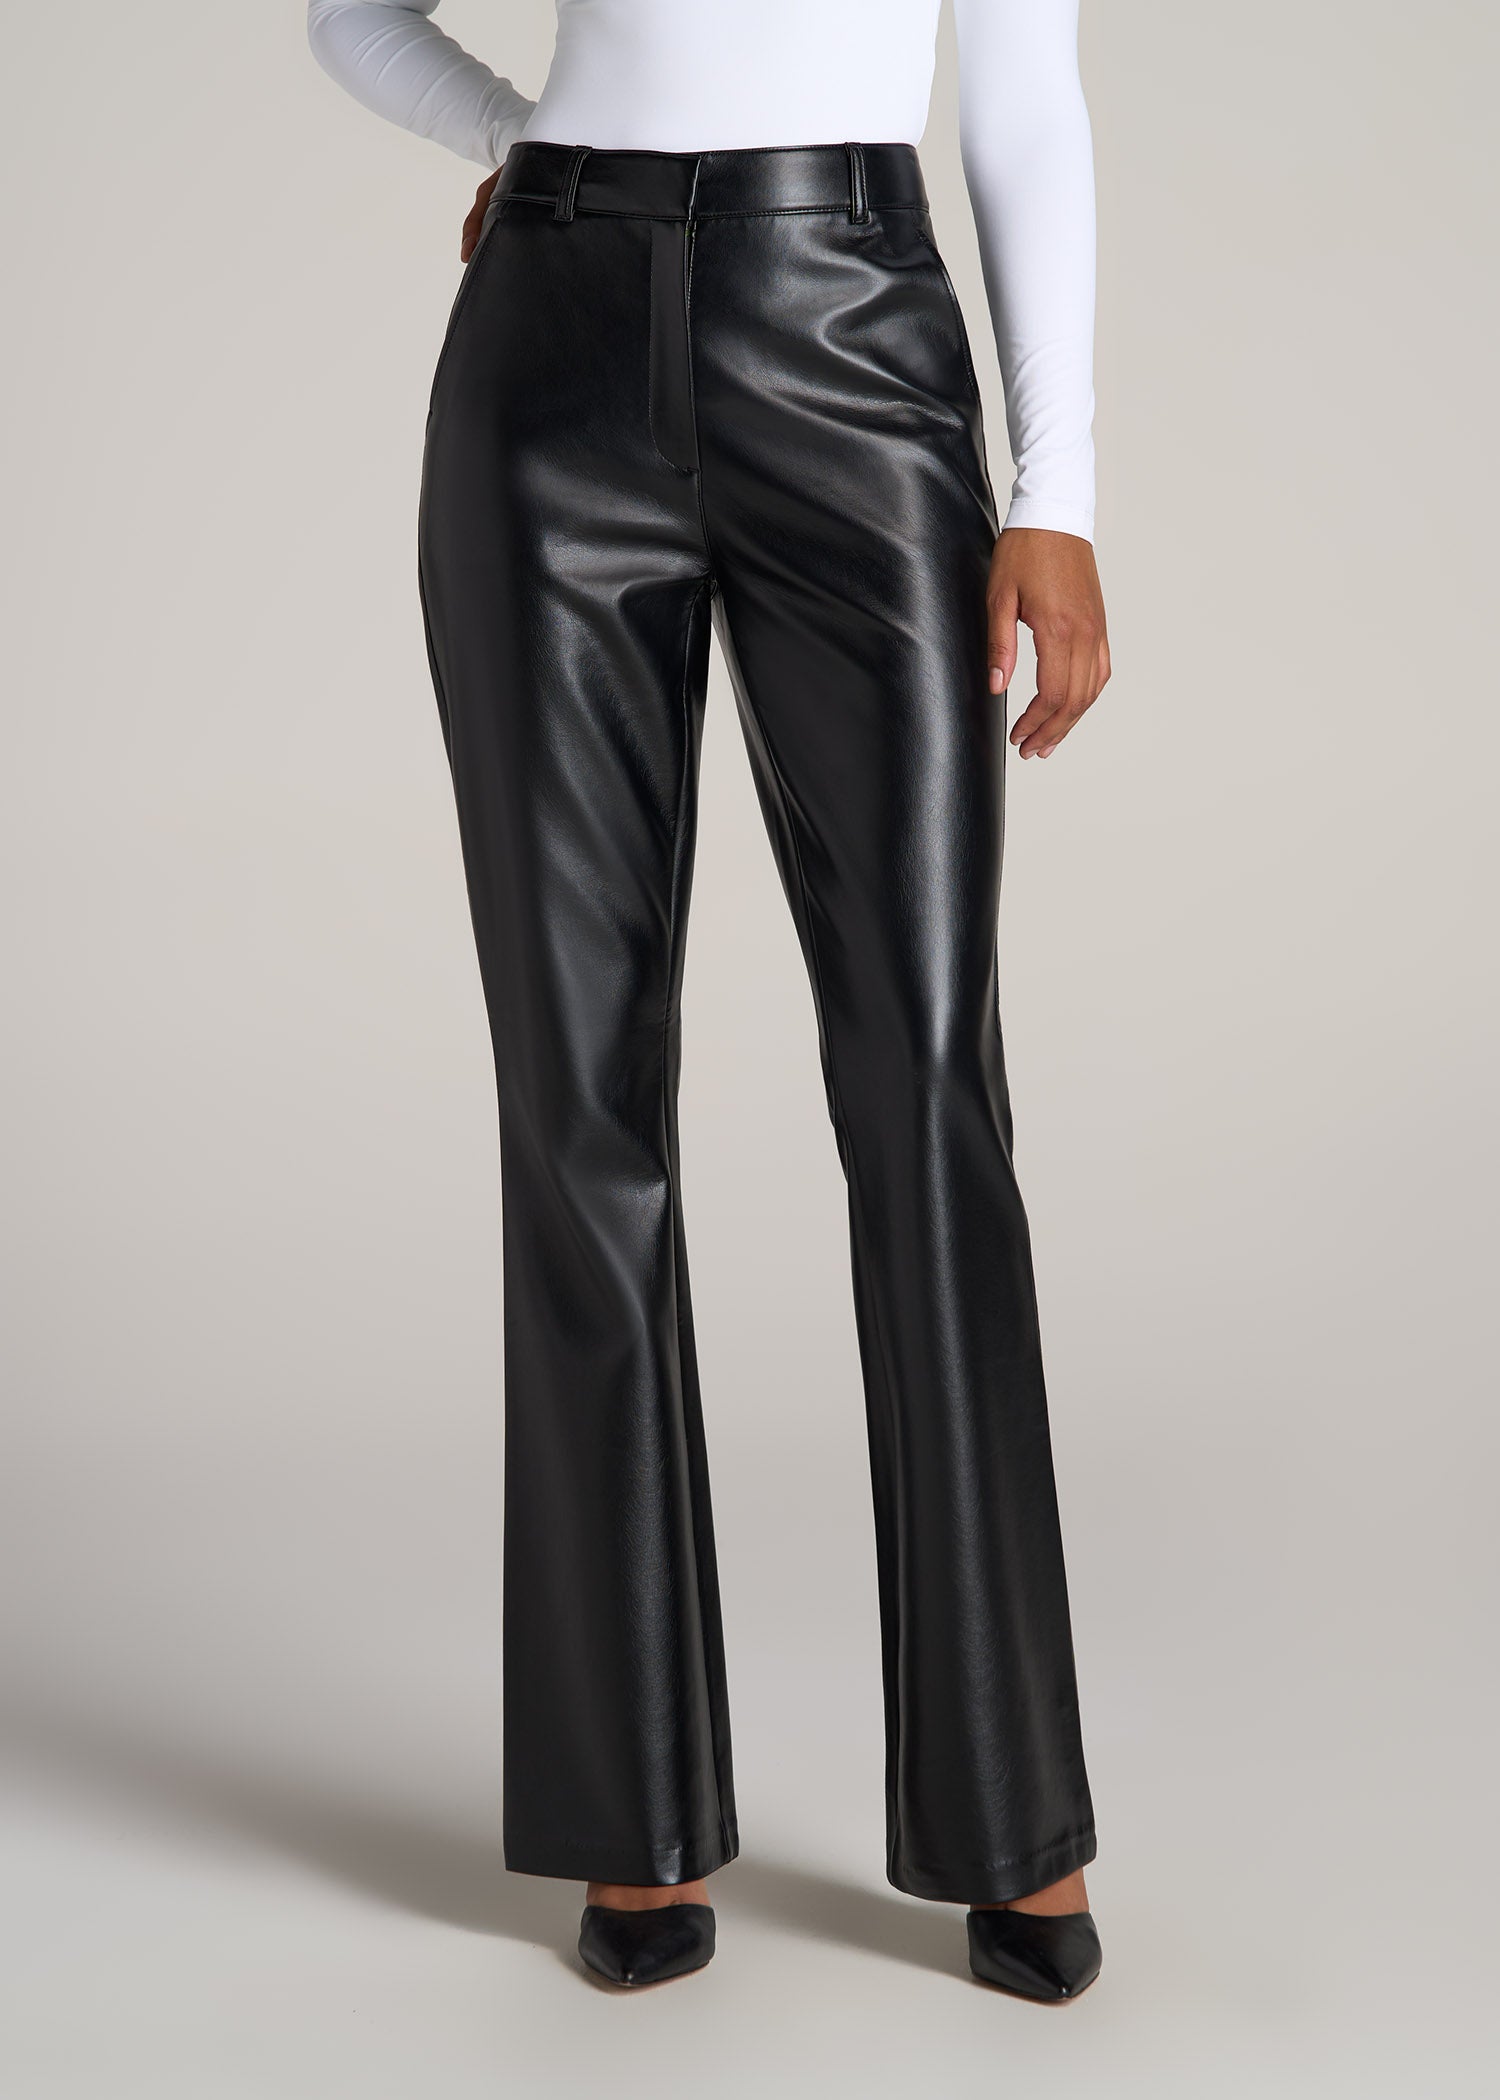 American-Tall-Women-High-Rise-Flare-Faux-Leather-Pant-Black-front